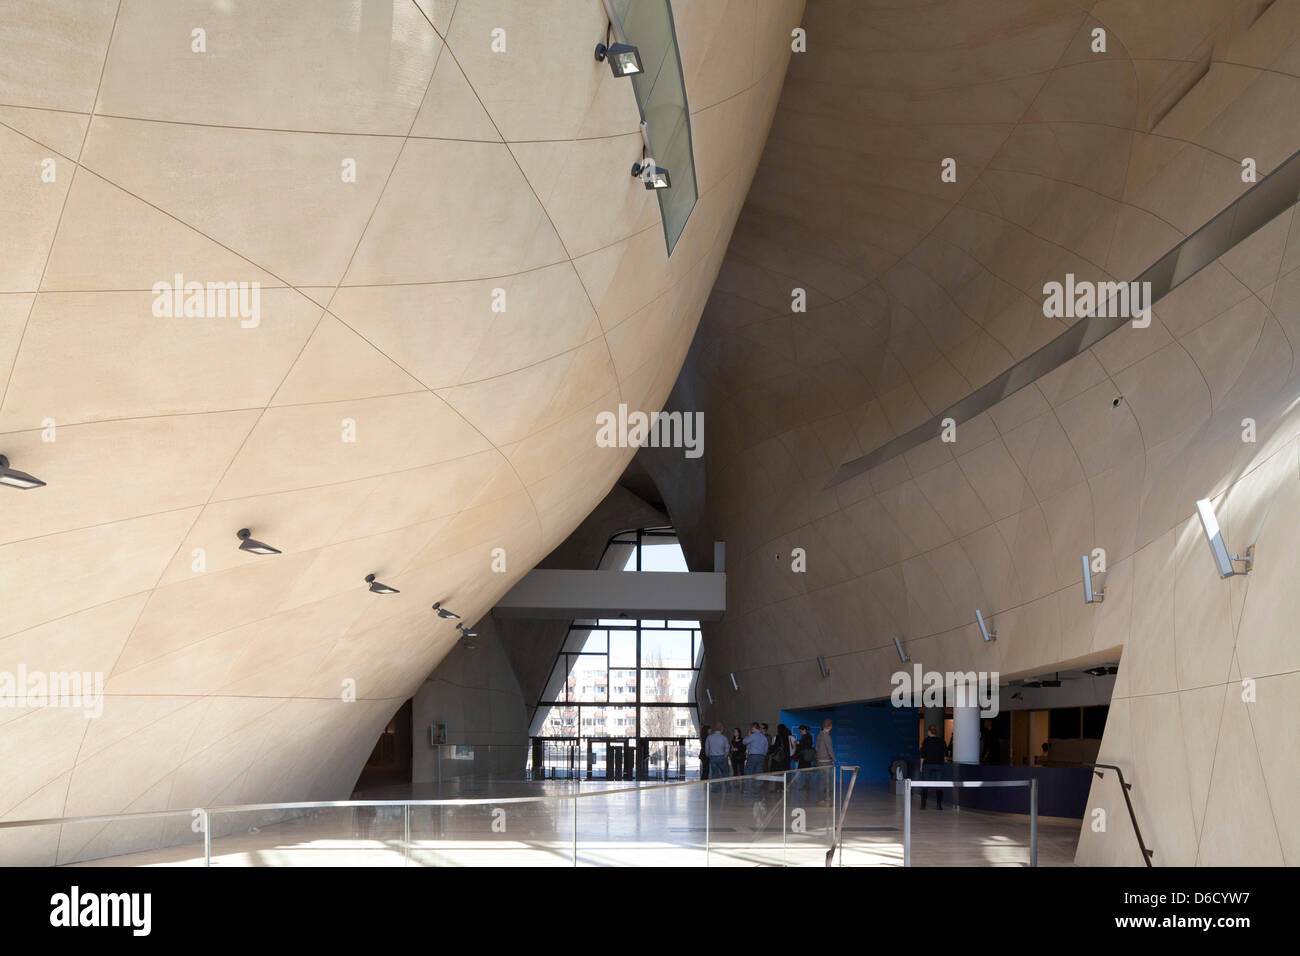 Warsaw, Poland. 16th April, 2013. Museum of the History of Polish Jews shortly before the museum's first preview on April 19, 2013, the 70th Anniversary of the Warsaw Ghetto Uprising. Credit: David Goldfarb/Alamy Live News Stock Photo